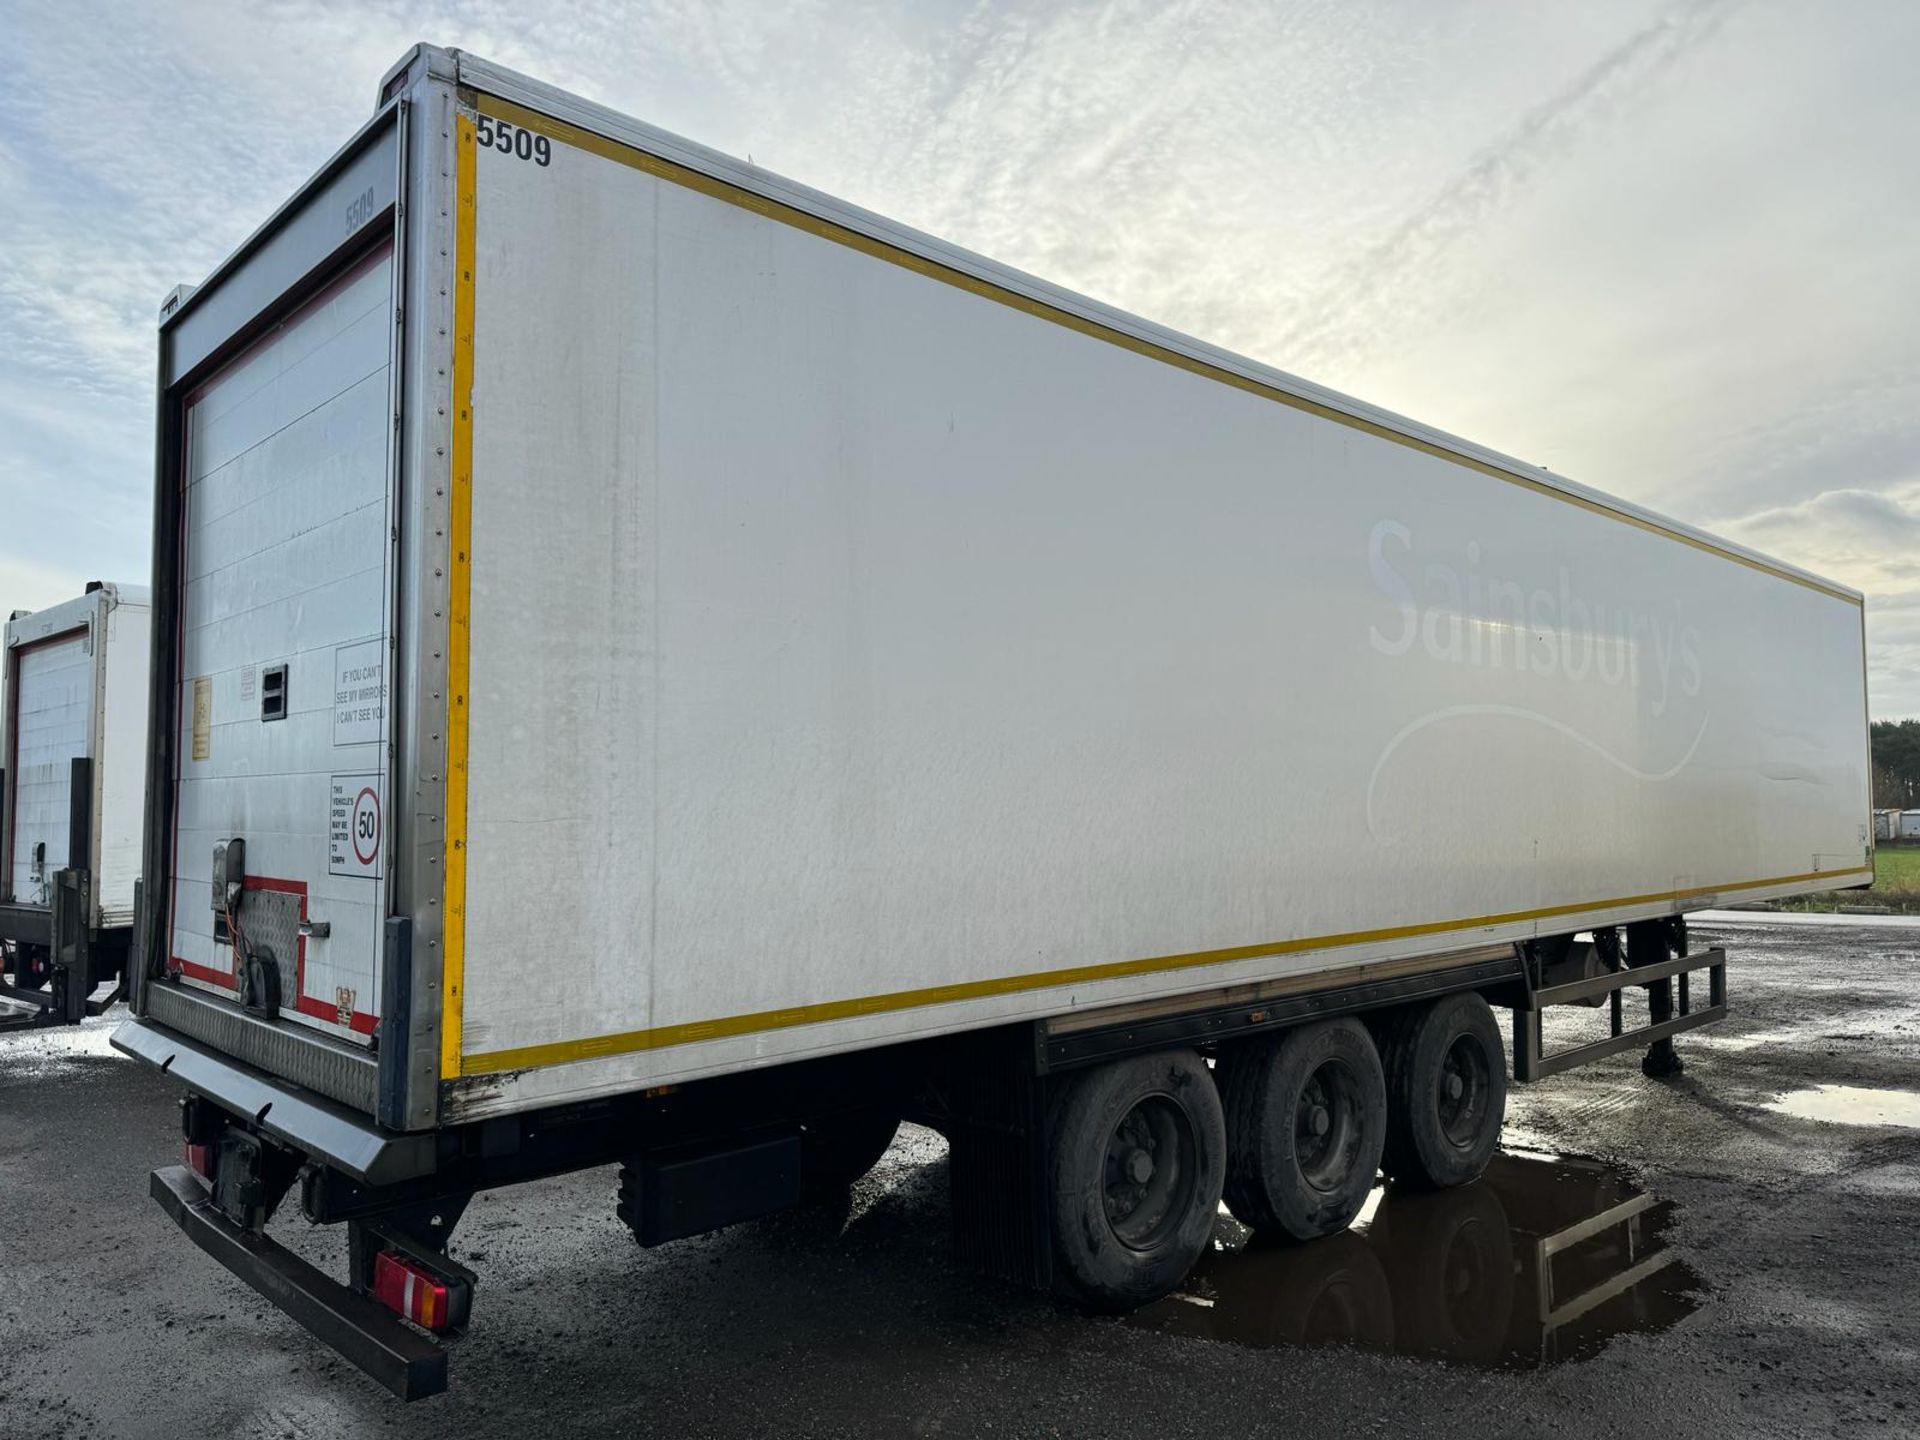 5509 – 2014 Montracon 13.6m Refrigerated Trailer - Image 5 of 11